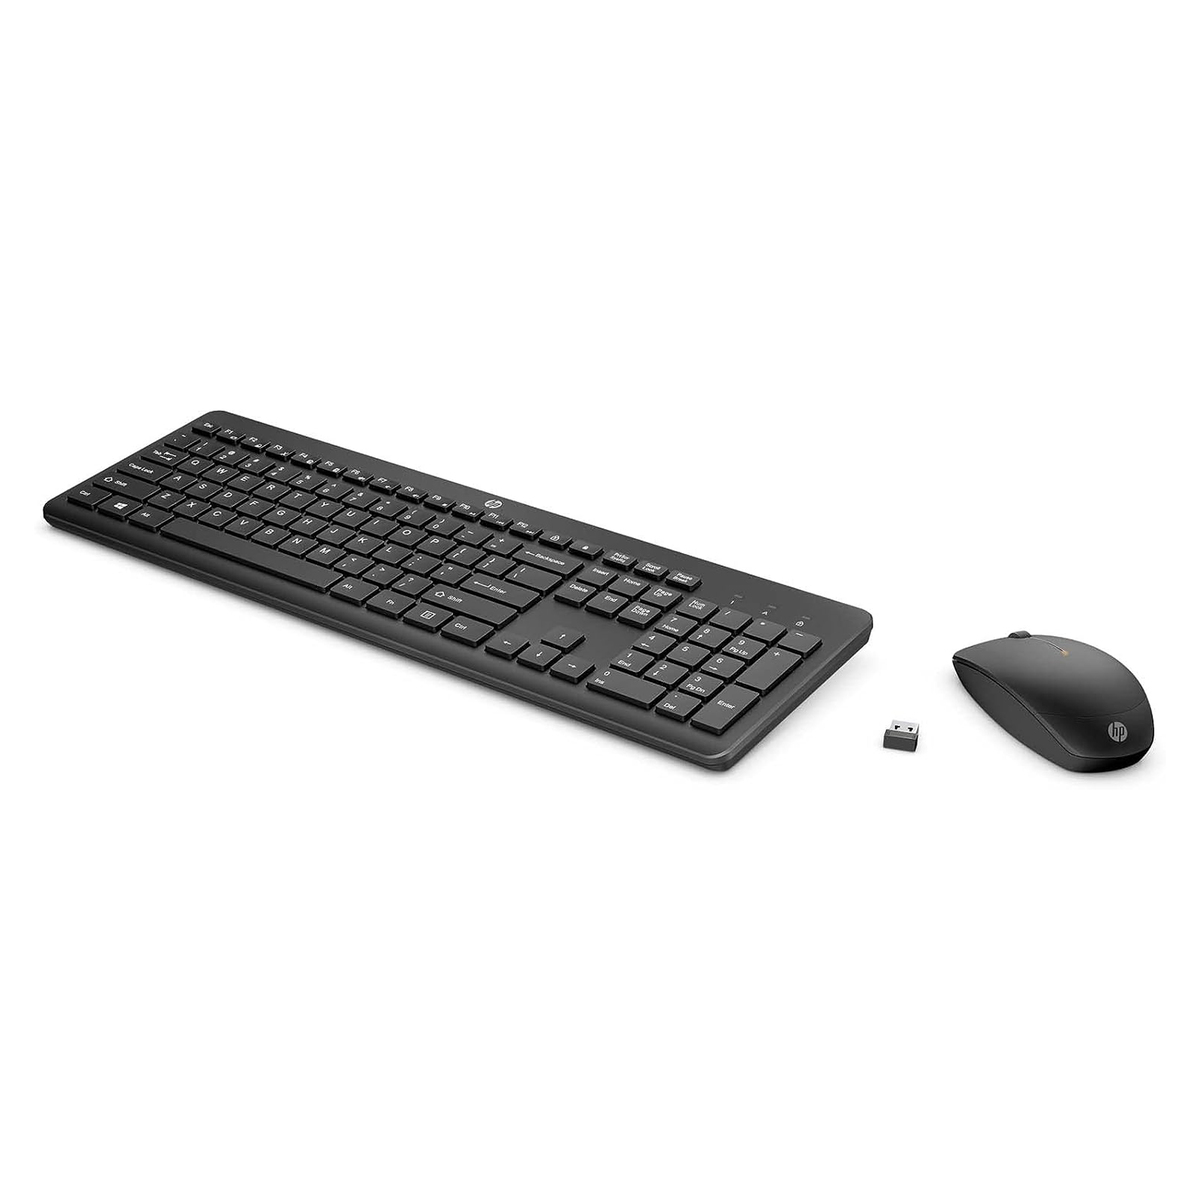 HP 230 Wireless Keyboard and Mouse Combo, 1600 DPI, Assorted Color